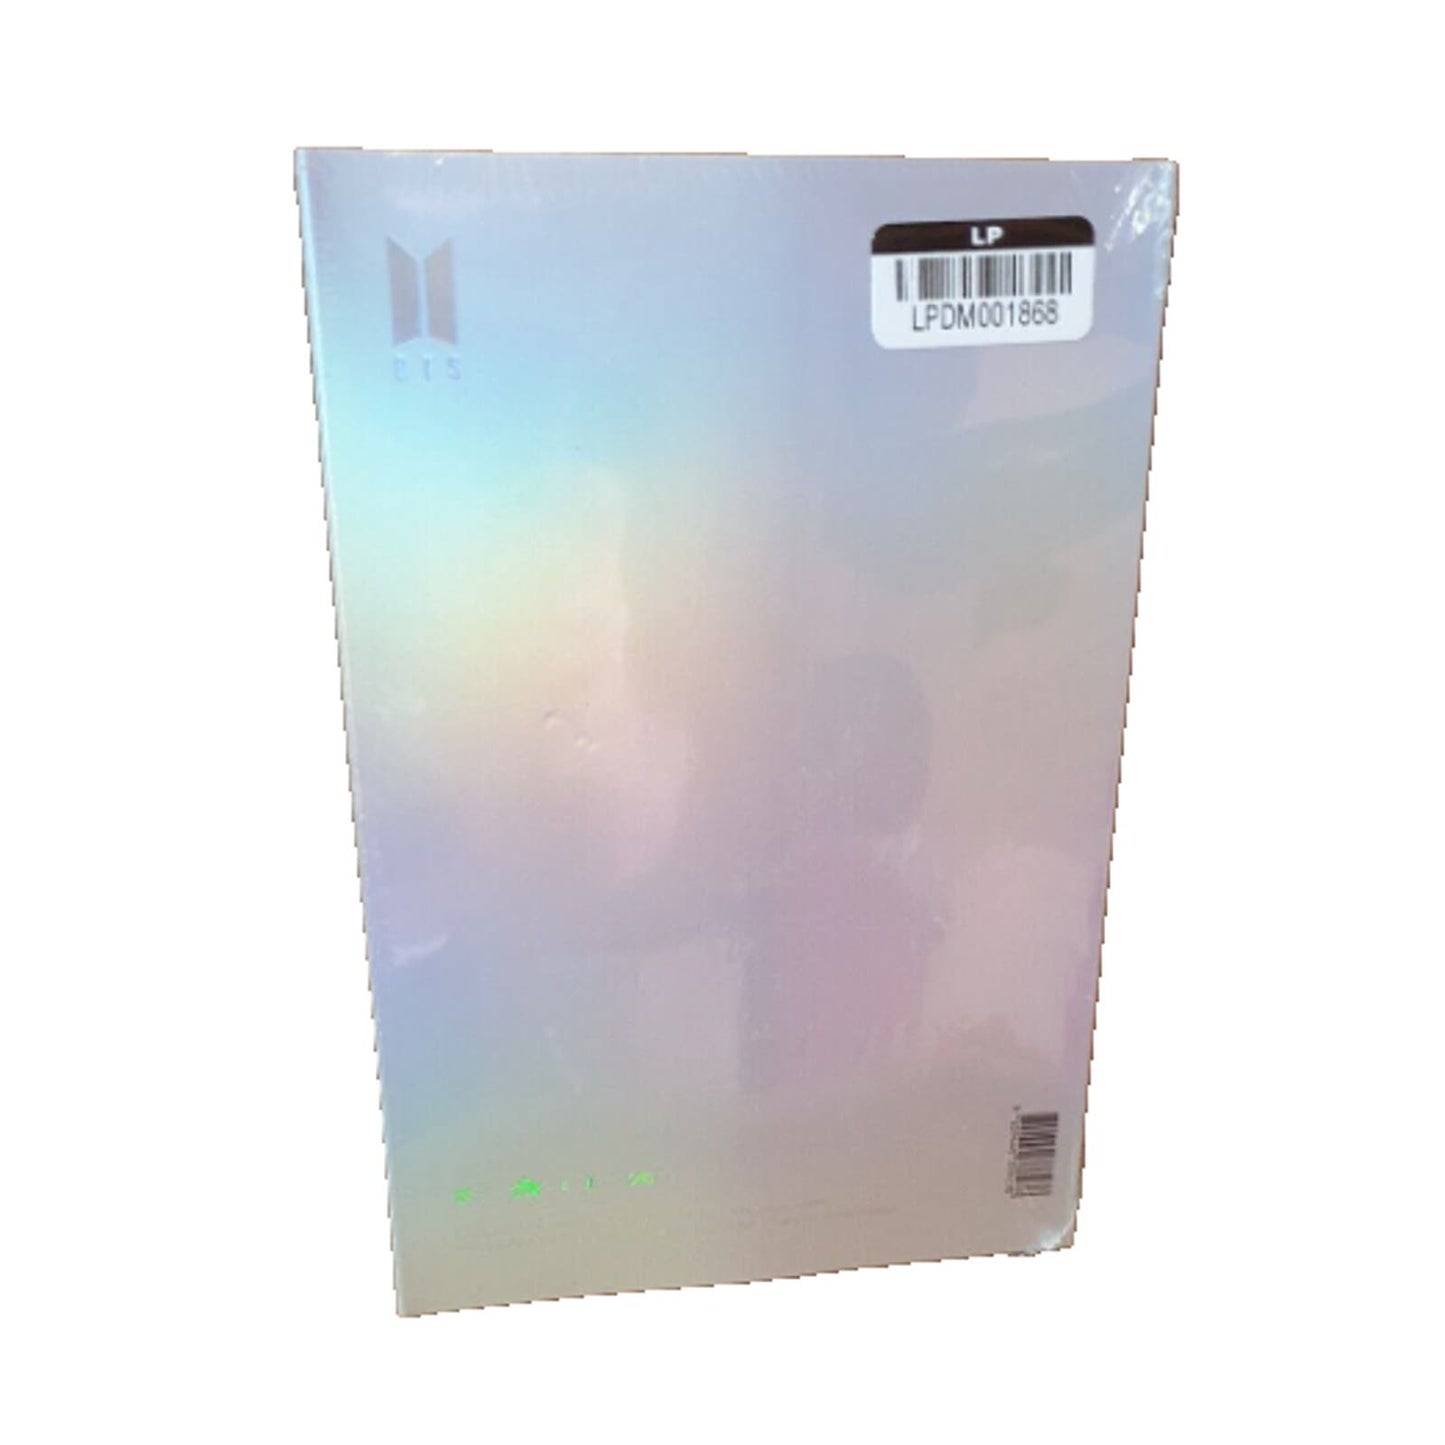 LOVE YOURSELF: Answer, Music CD, by South Korean boy band BTS, K-Pop